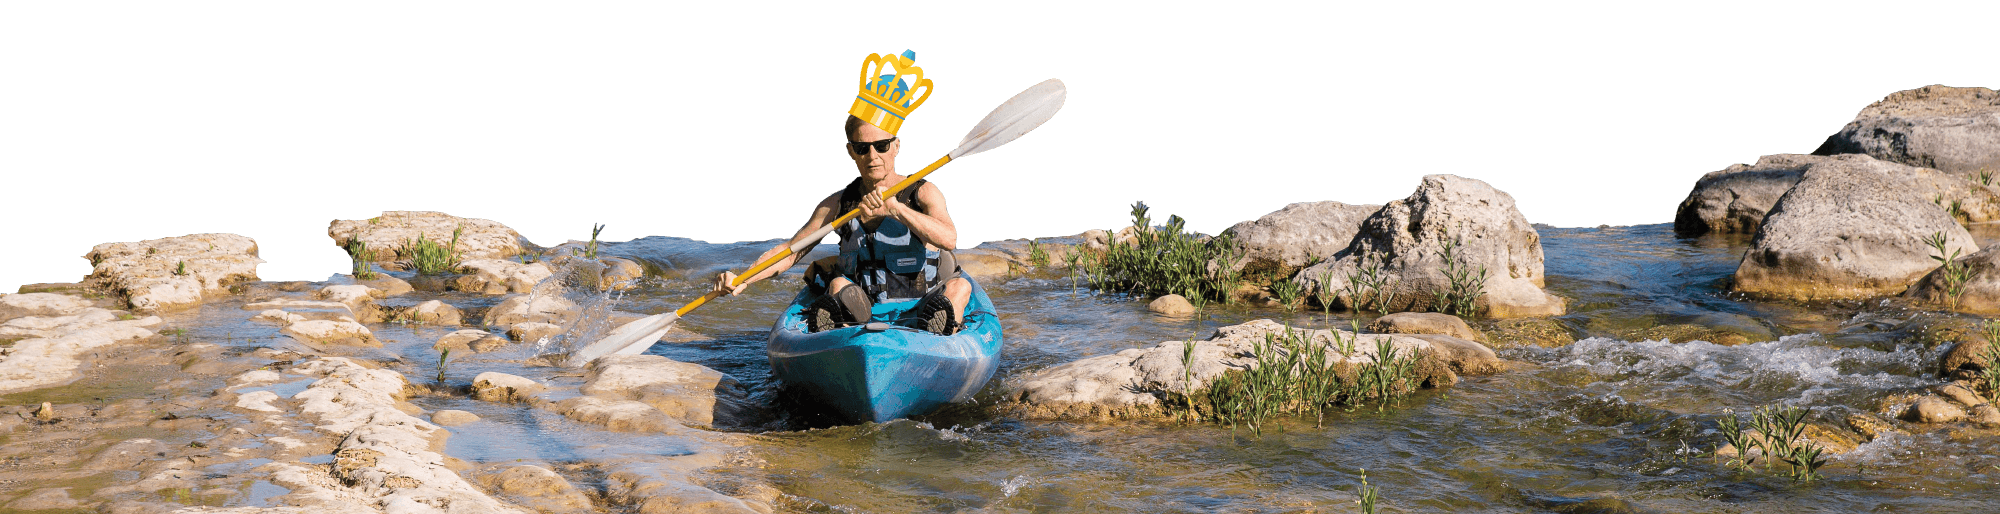 A man in a kayak with an illustrated crown on his head